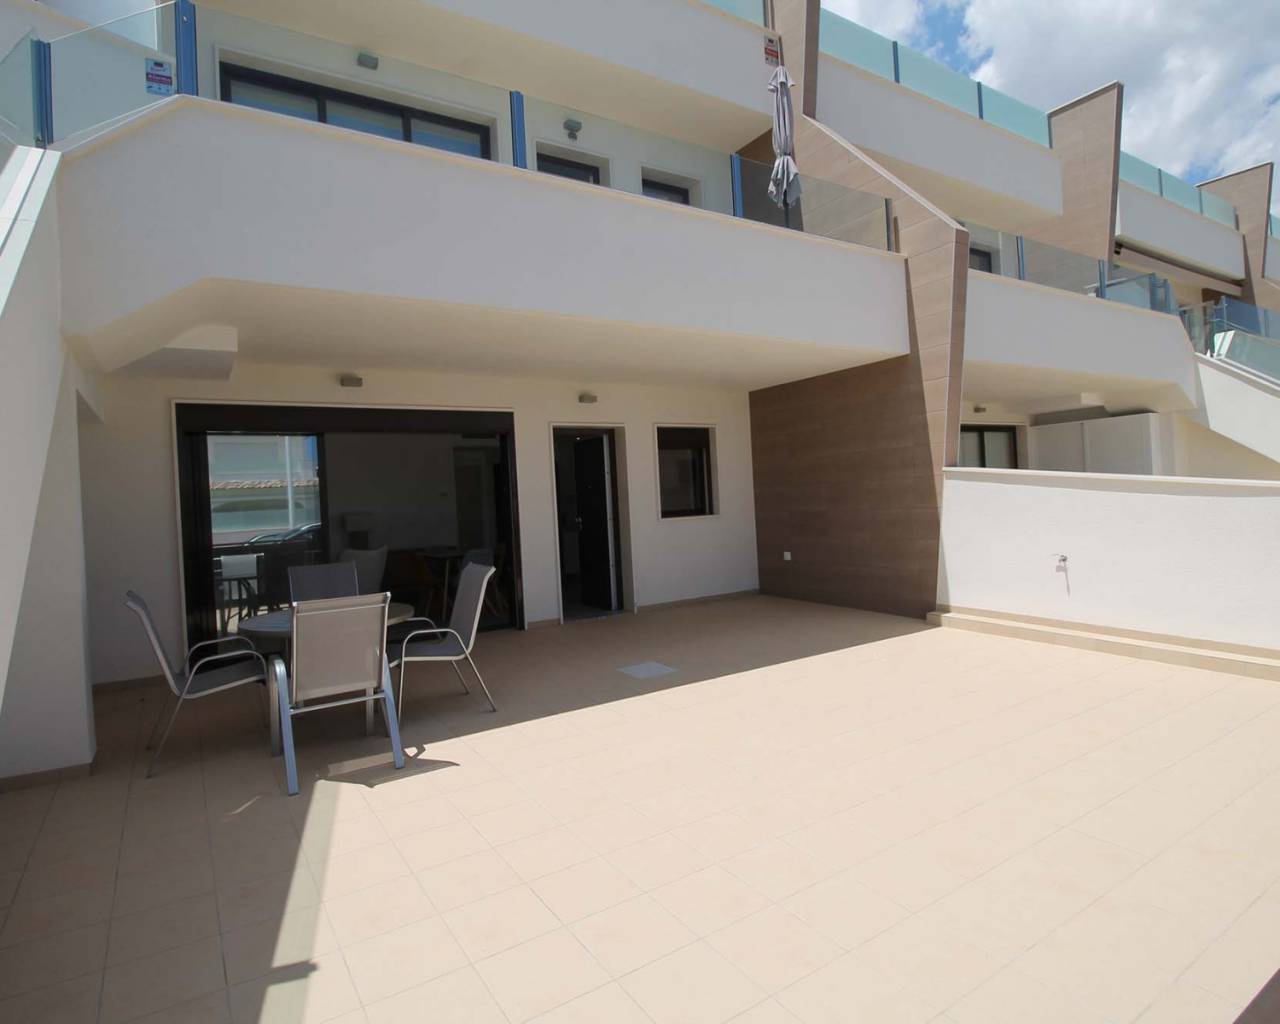 Apartment for sale near the beach of Lo Pagán in Murcia